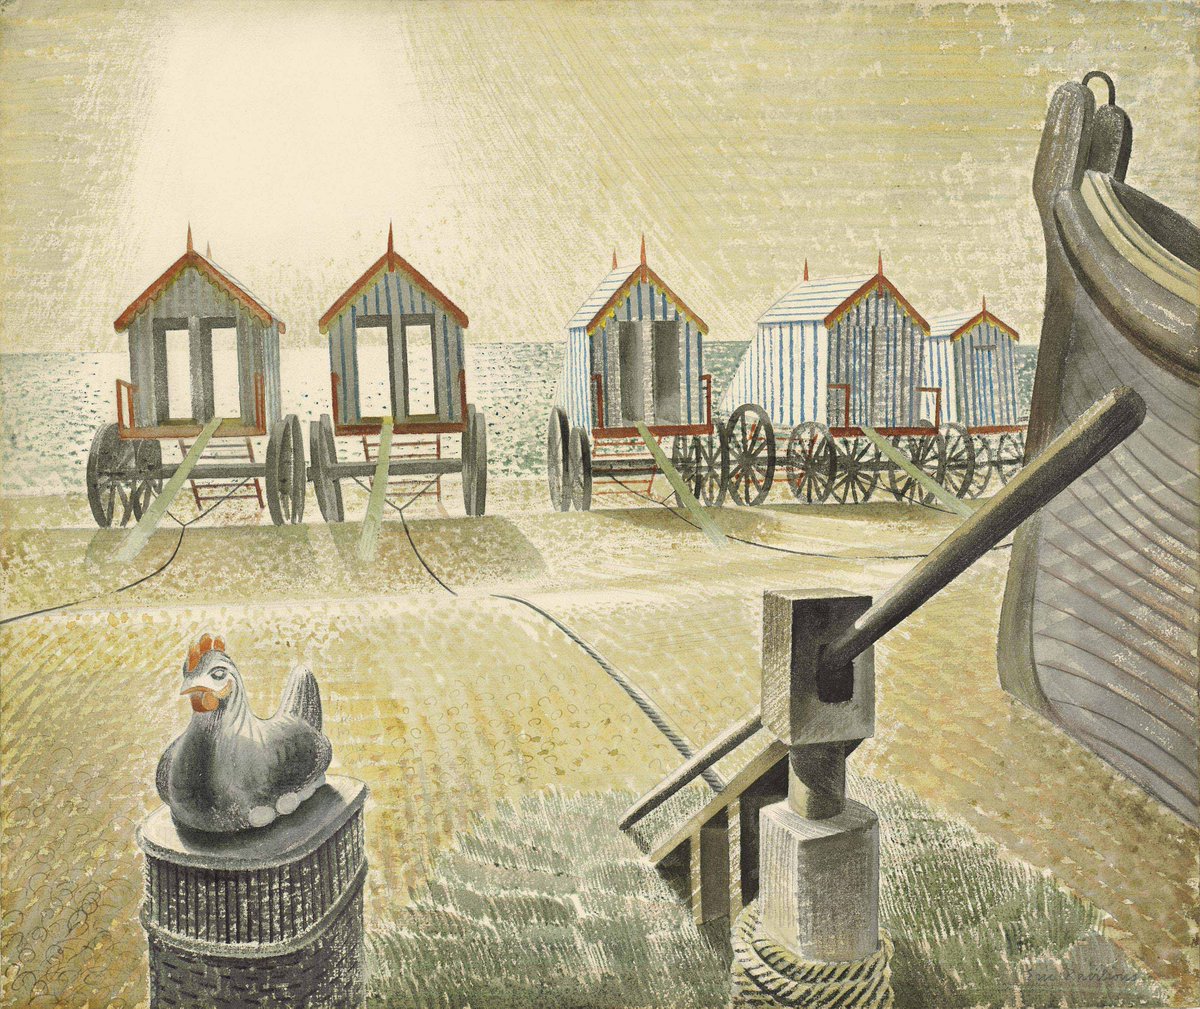 Bathing Machines, Eric Ravilious, 1938. This is one of a series depicting Aldeburgh beach in #Suffolk. The original artwork is in the collection of @TownerGallery.